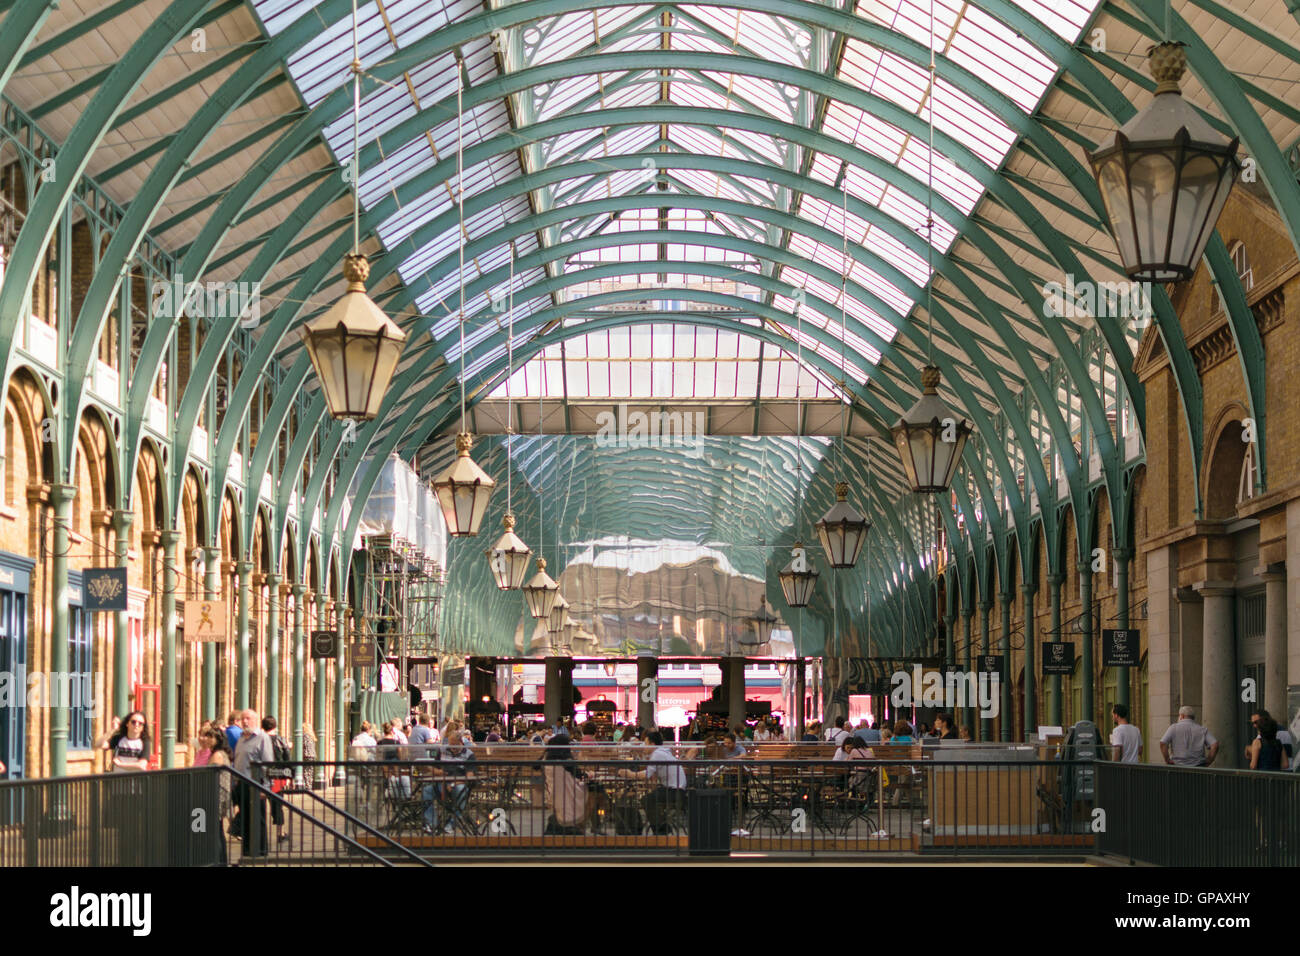 London, England - 30 August 2016: People spend time in Covent Market halls. The central hall has shops, cafes and bars. Stock Photo